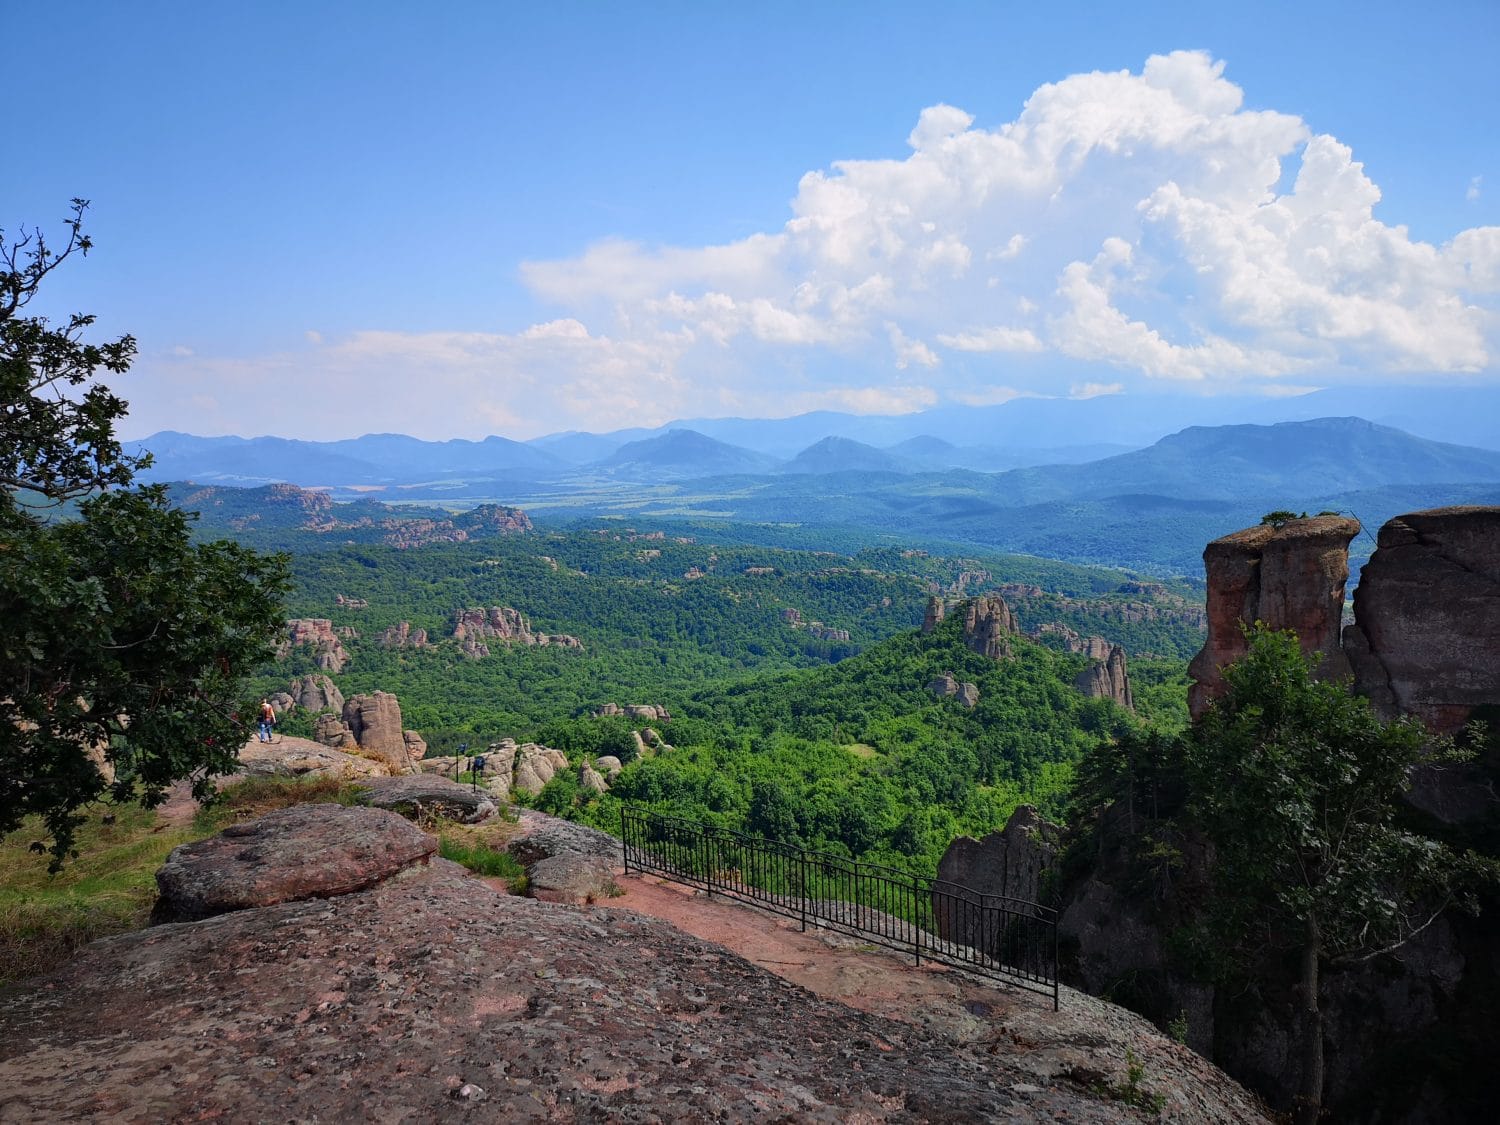 Bulgarian Mountains seen from the top of Belogradchik Fortress